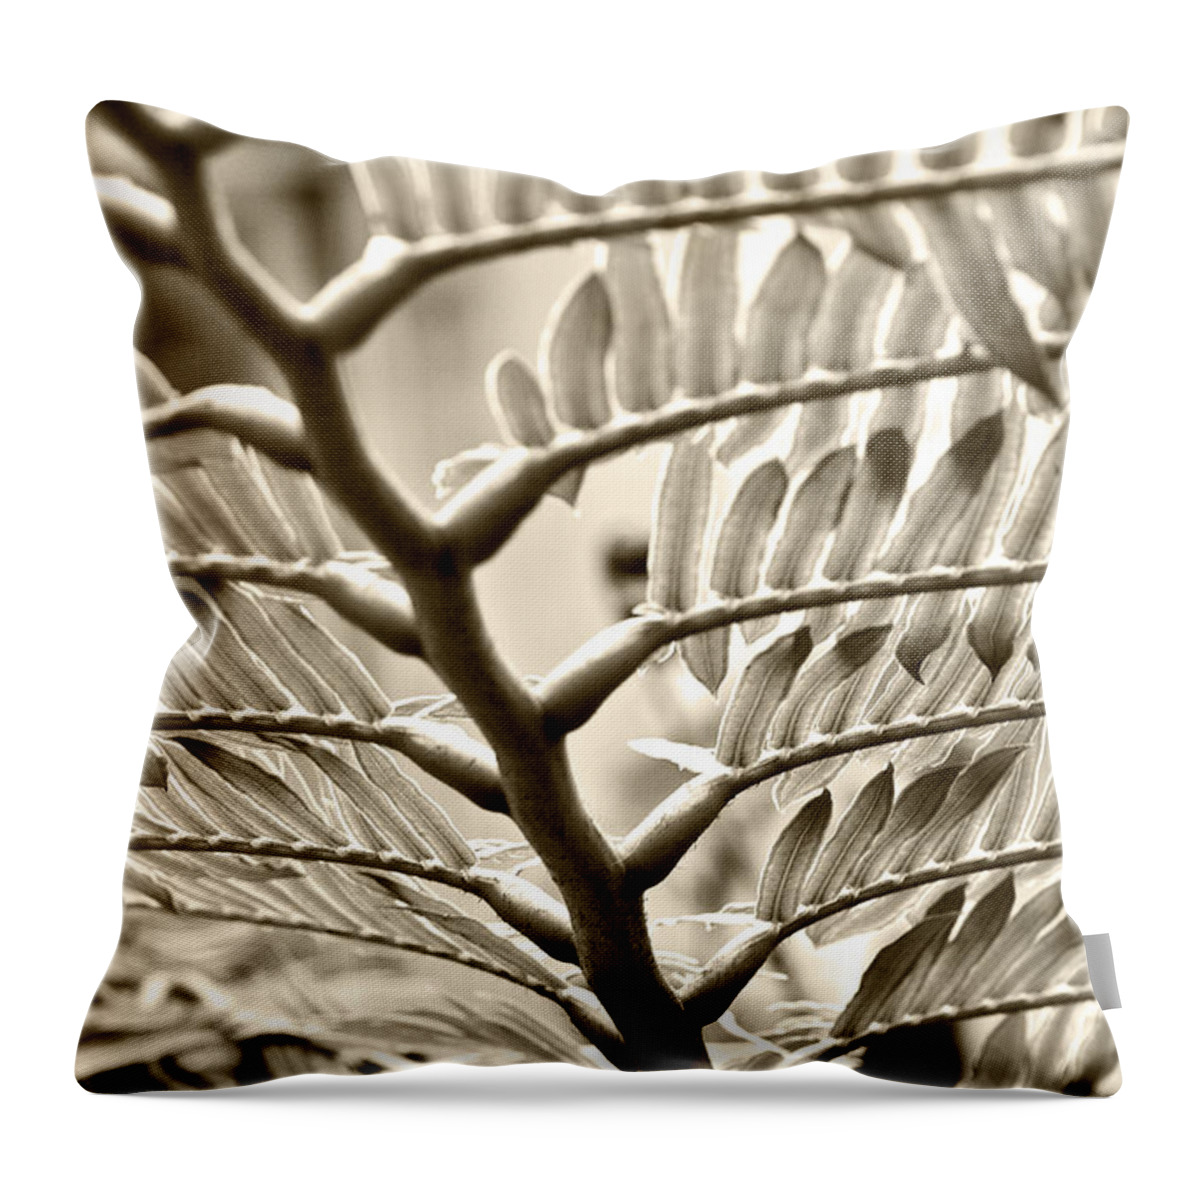 Botanical Throw Pillow featuring the photograph Translucidity by Melinda Ledsome